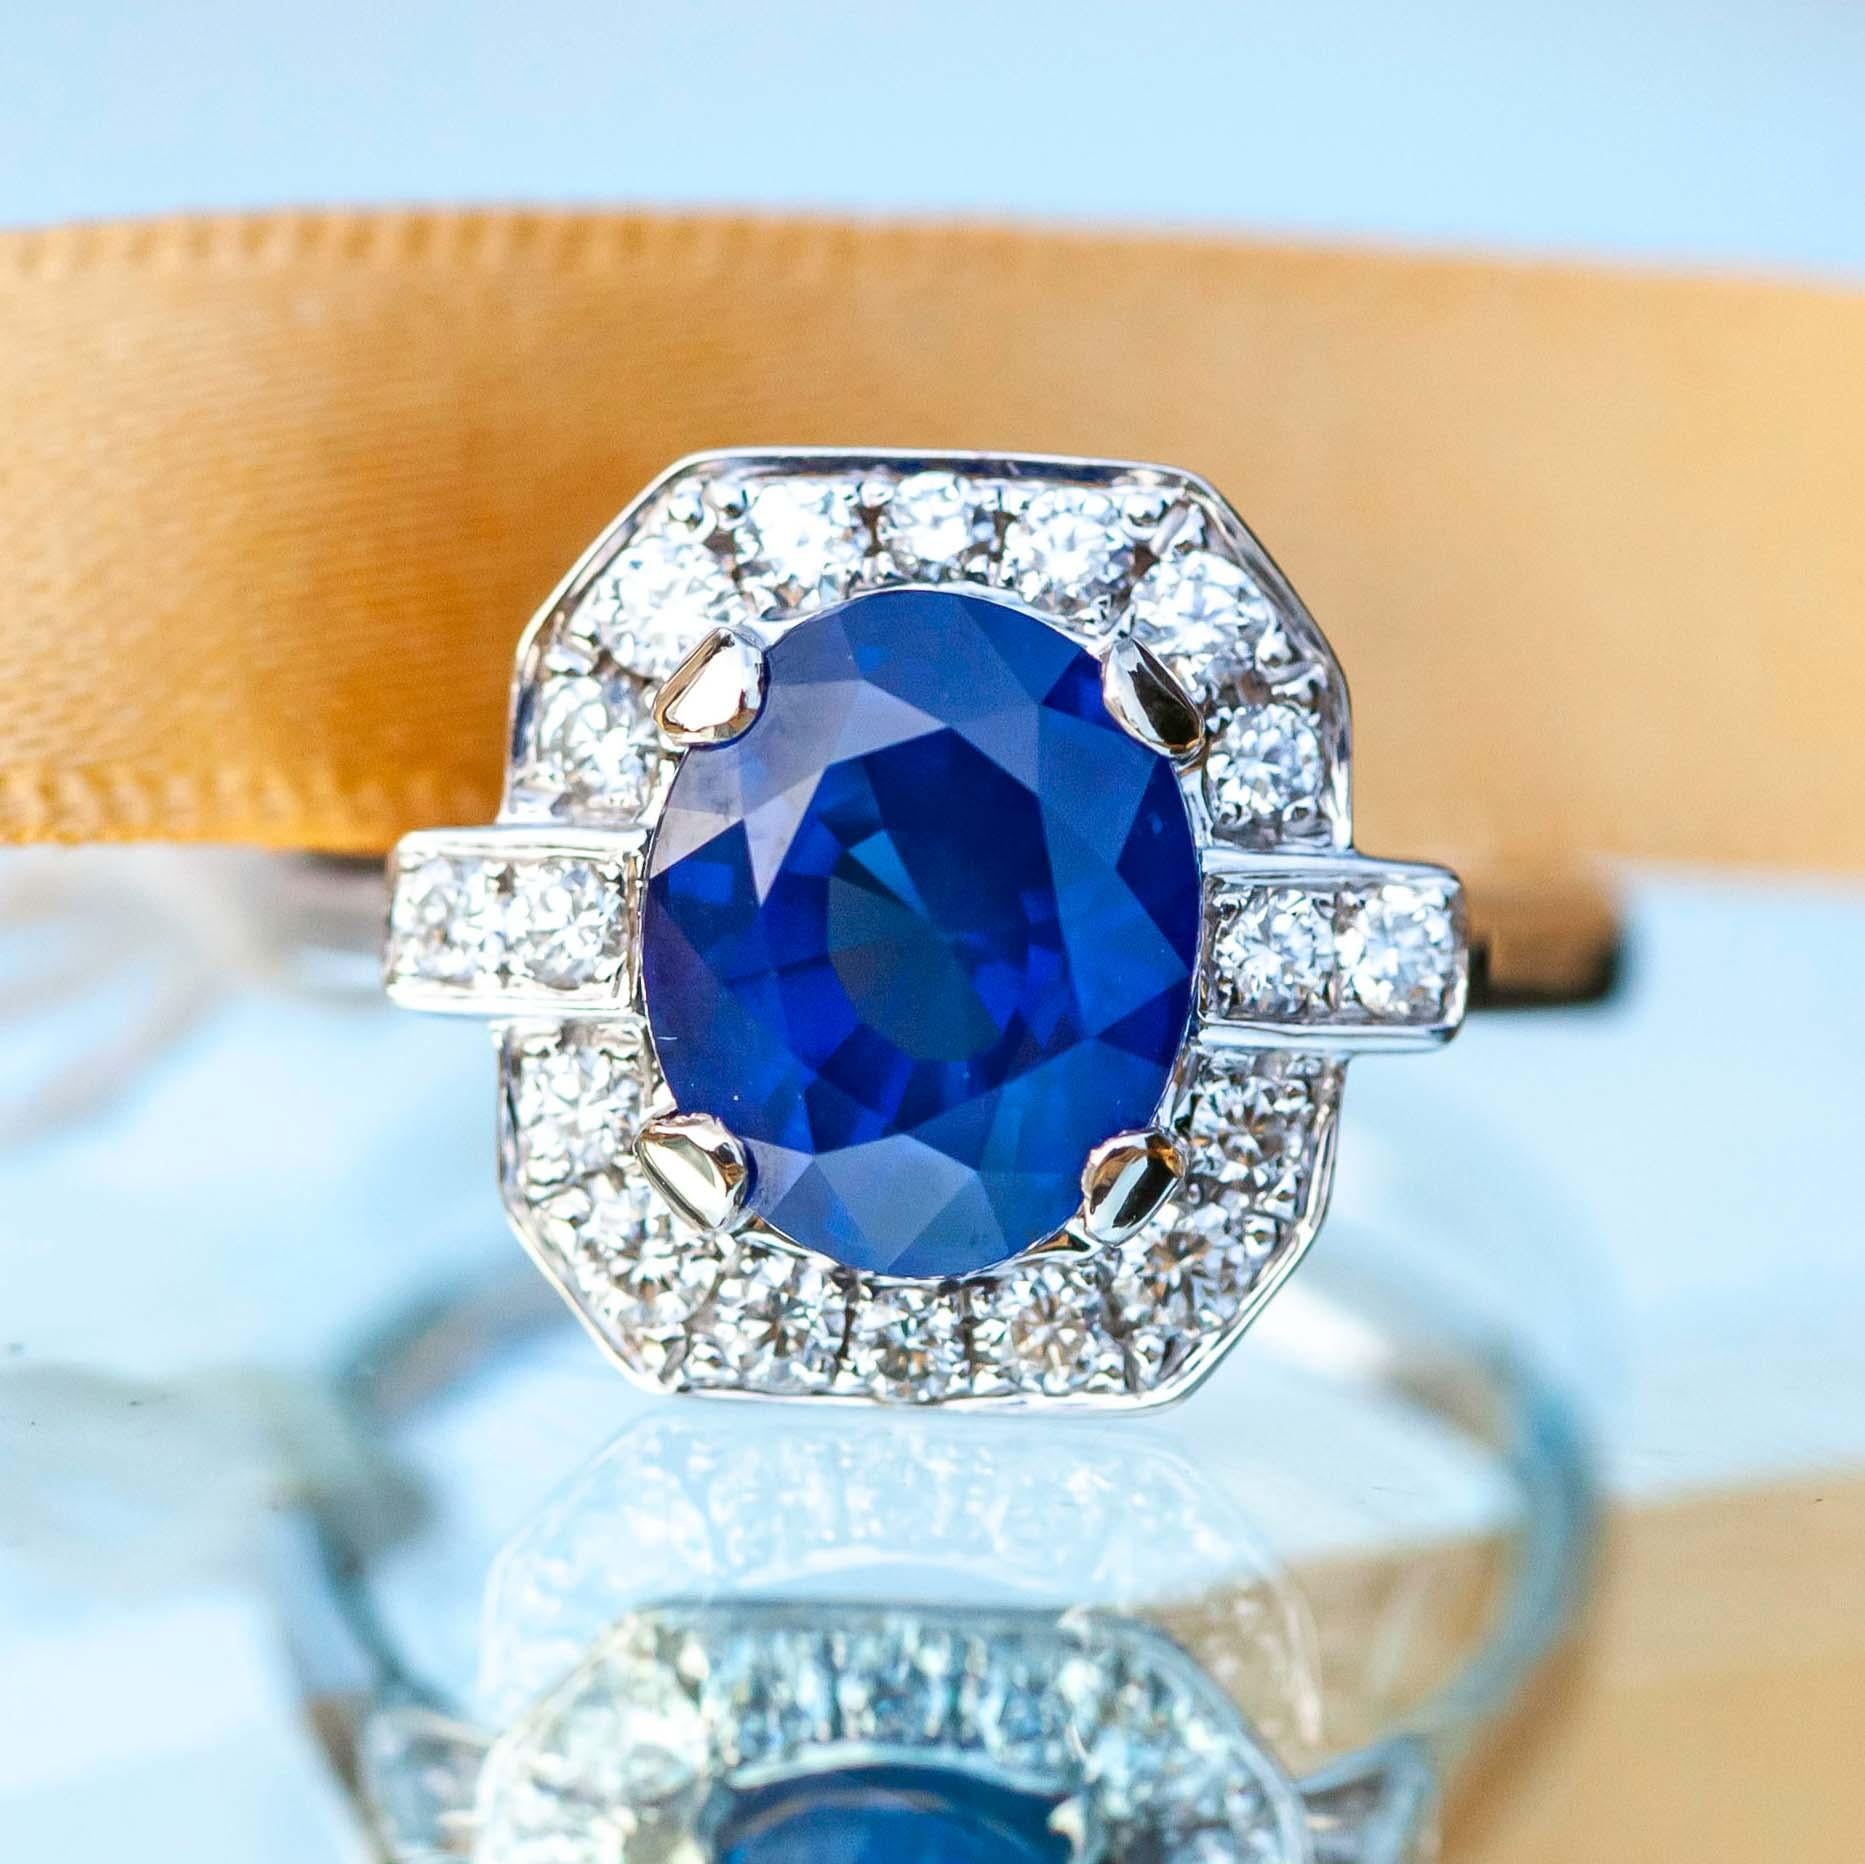 4,04ct Certified Oval Royal Blue Sapphire & 0,45ct Diamond 18ct White Gold Ring im Angebot